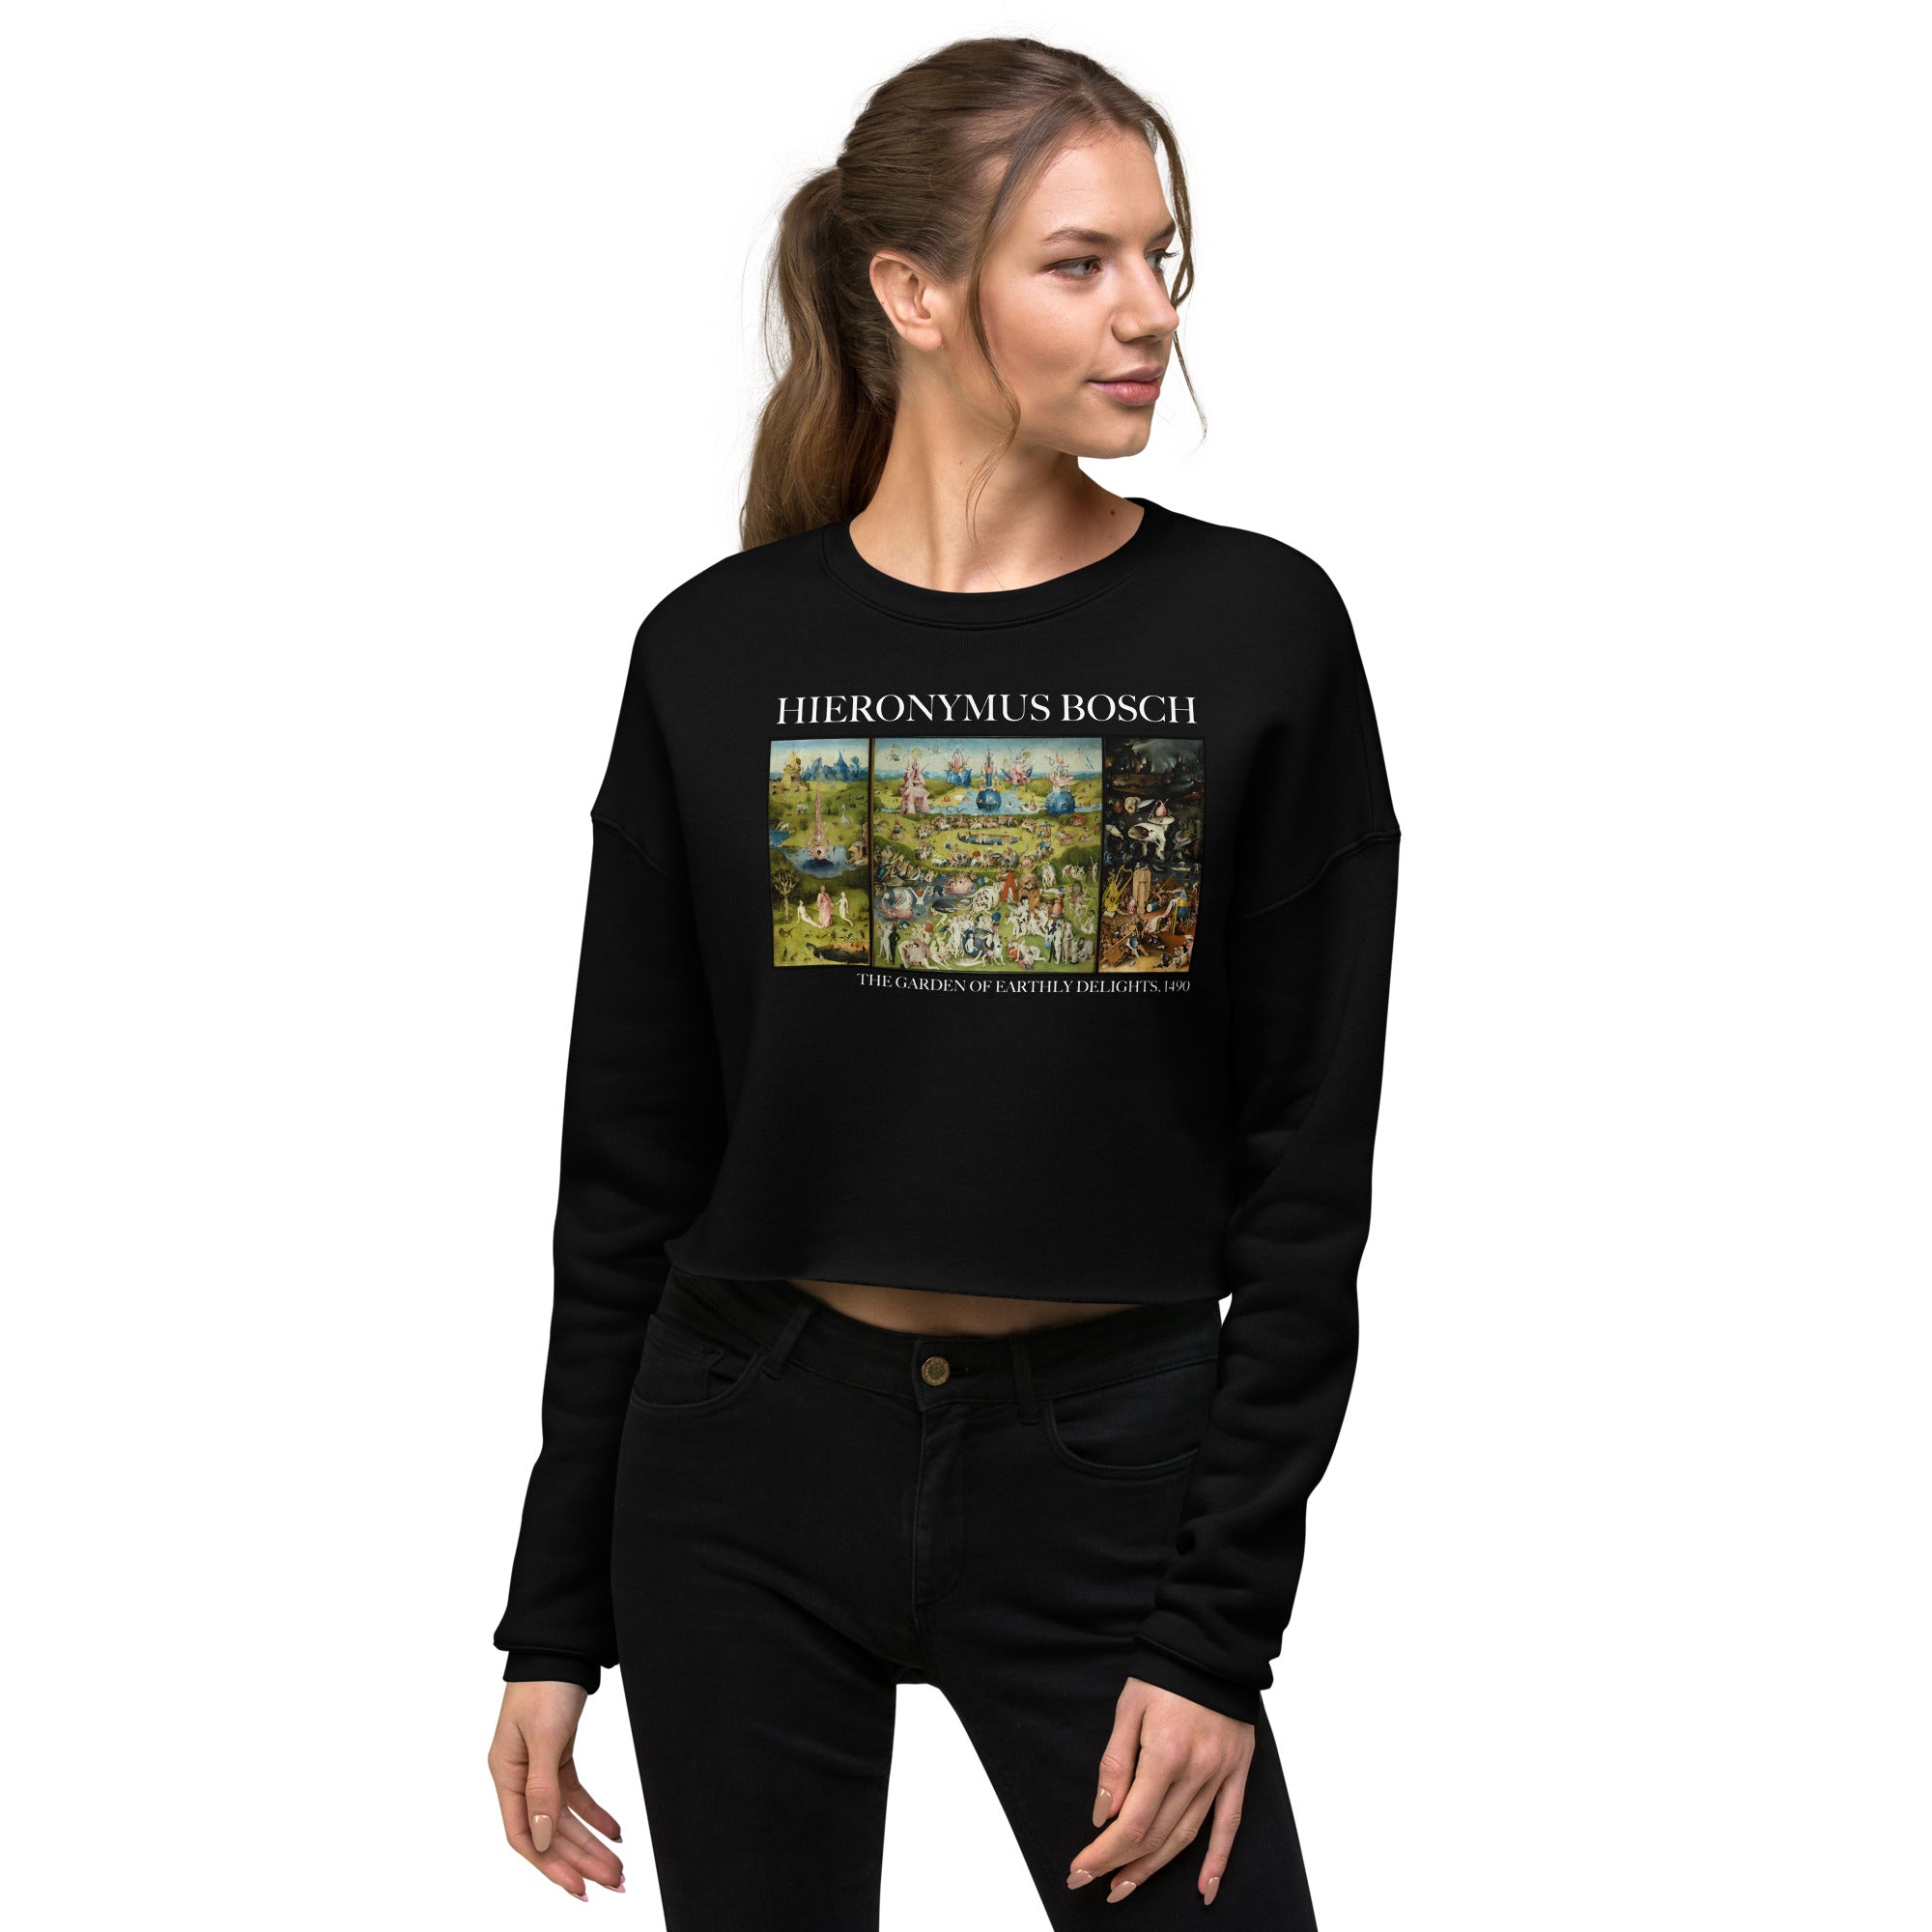 Hieronymus Bosch 'The Garden of Earthly Delights' Famous Painting Cropped Sweatshirt | Premium Art Cropped Sweatshirt